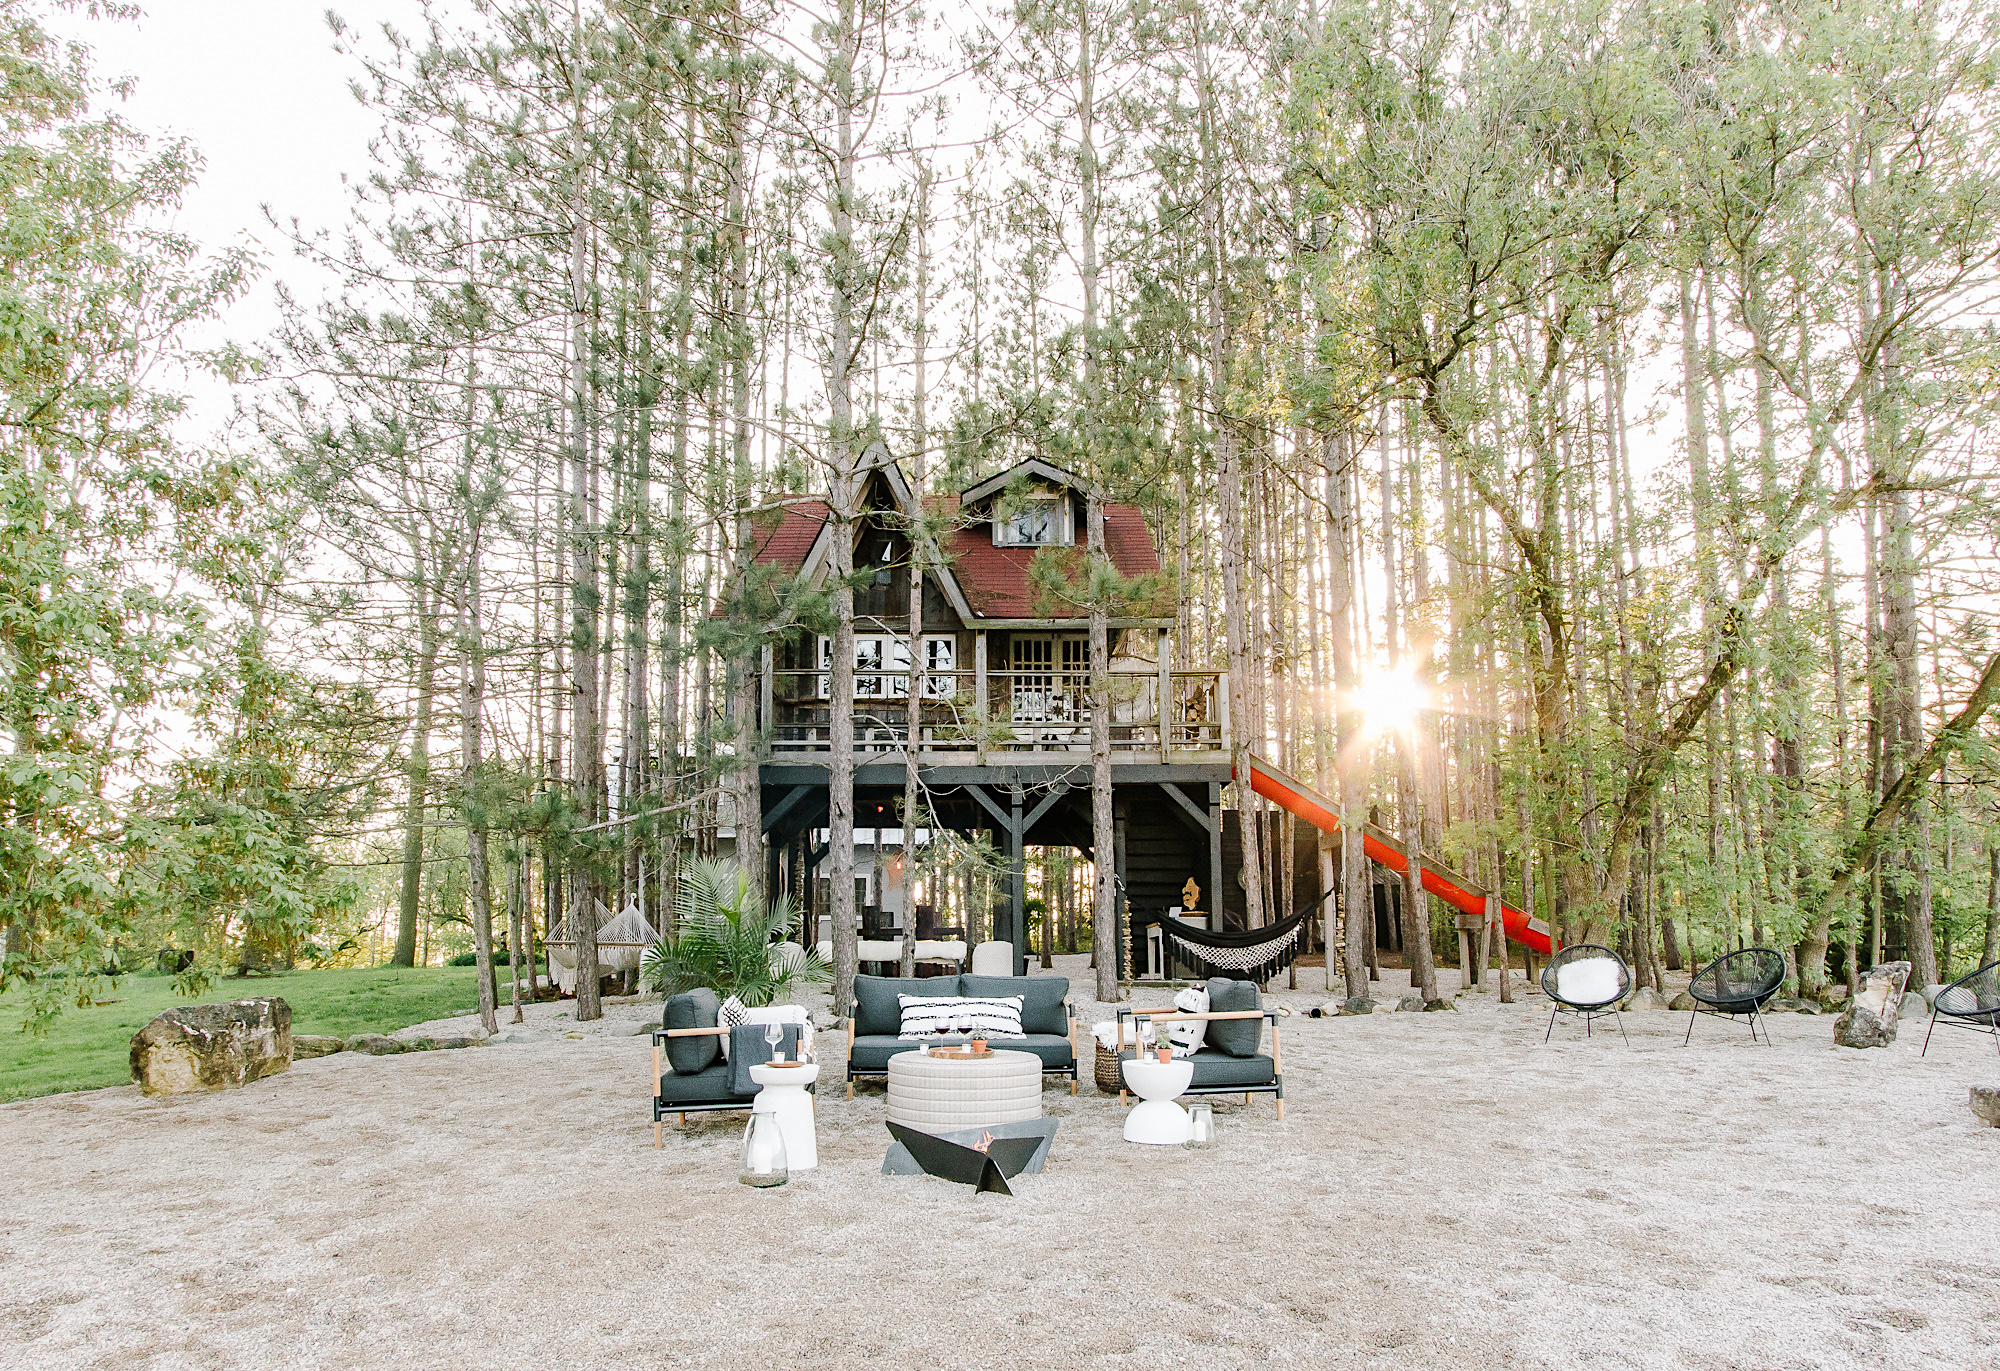 Treehouse photo gallery